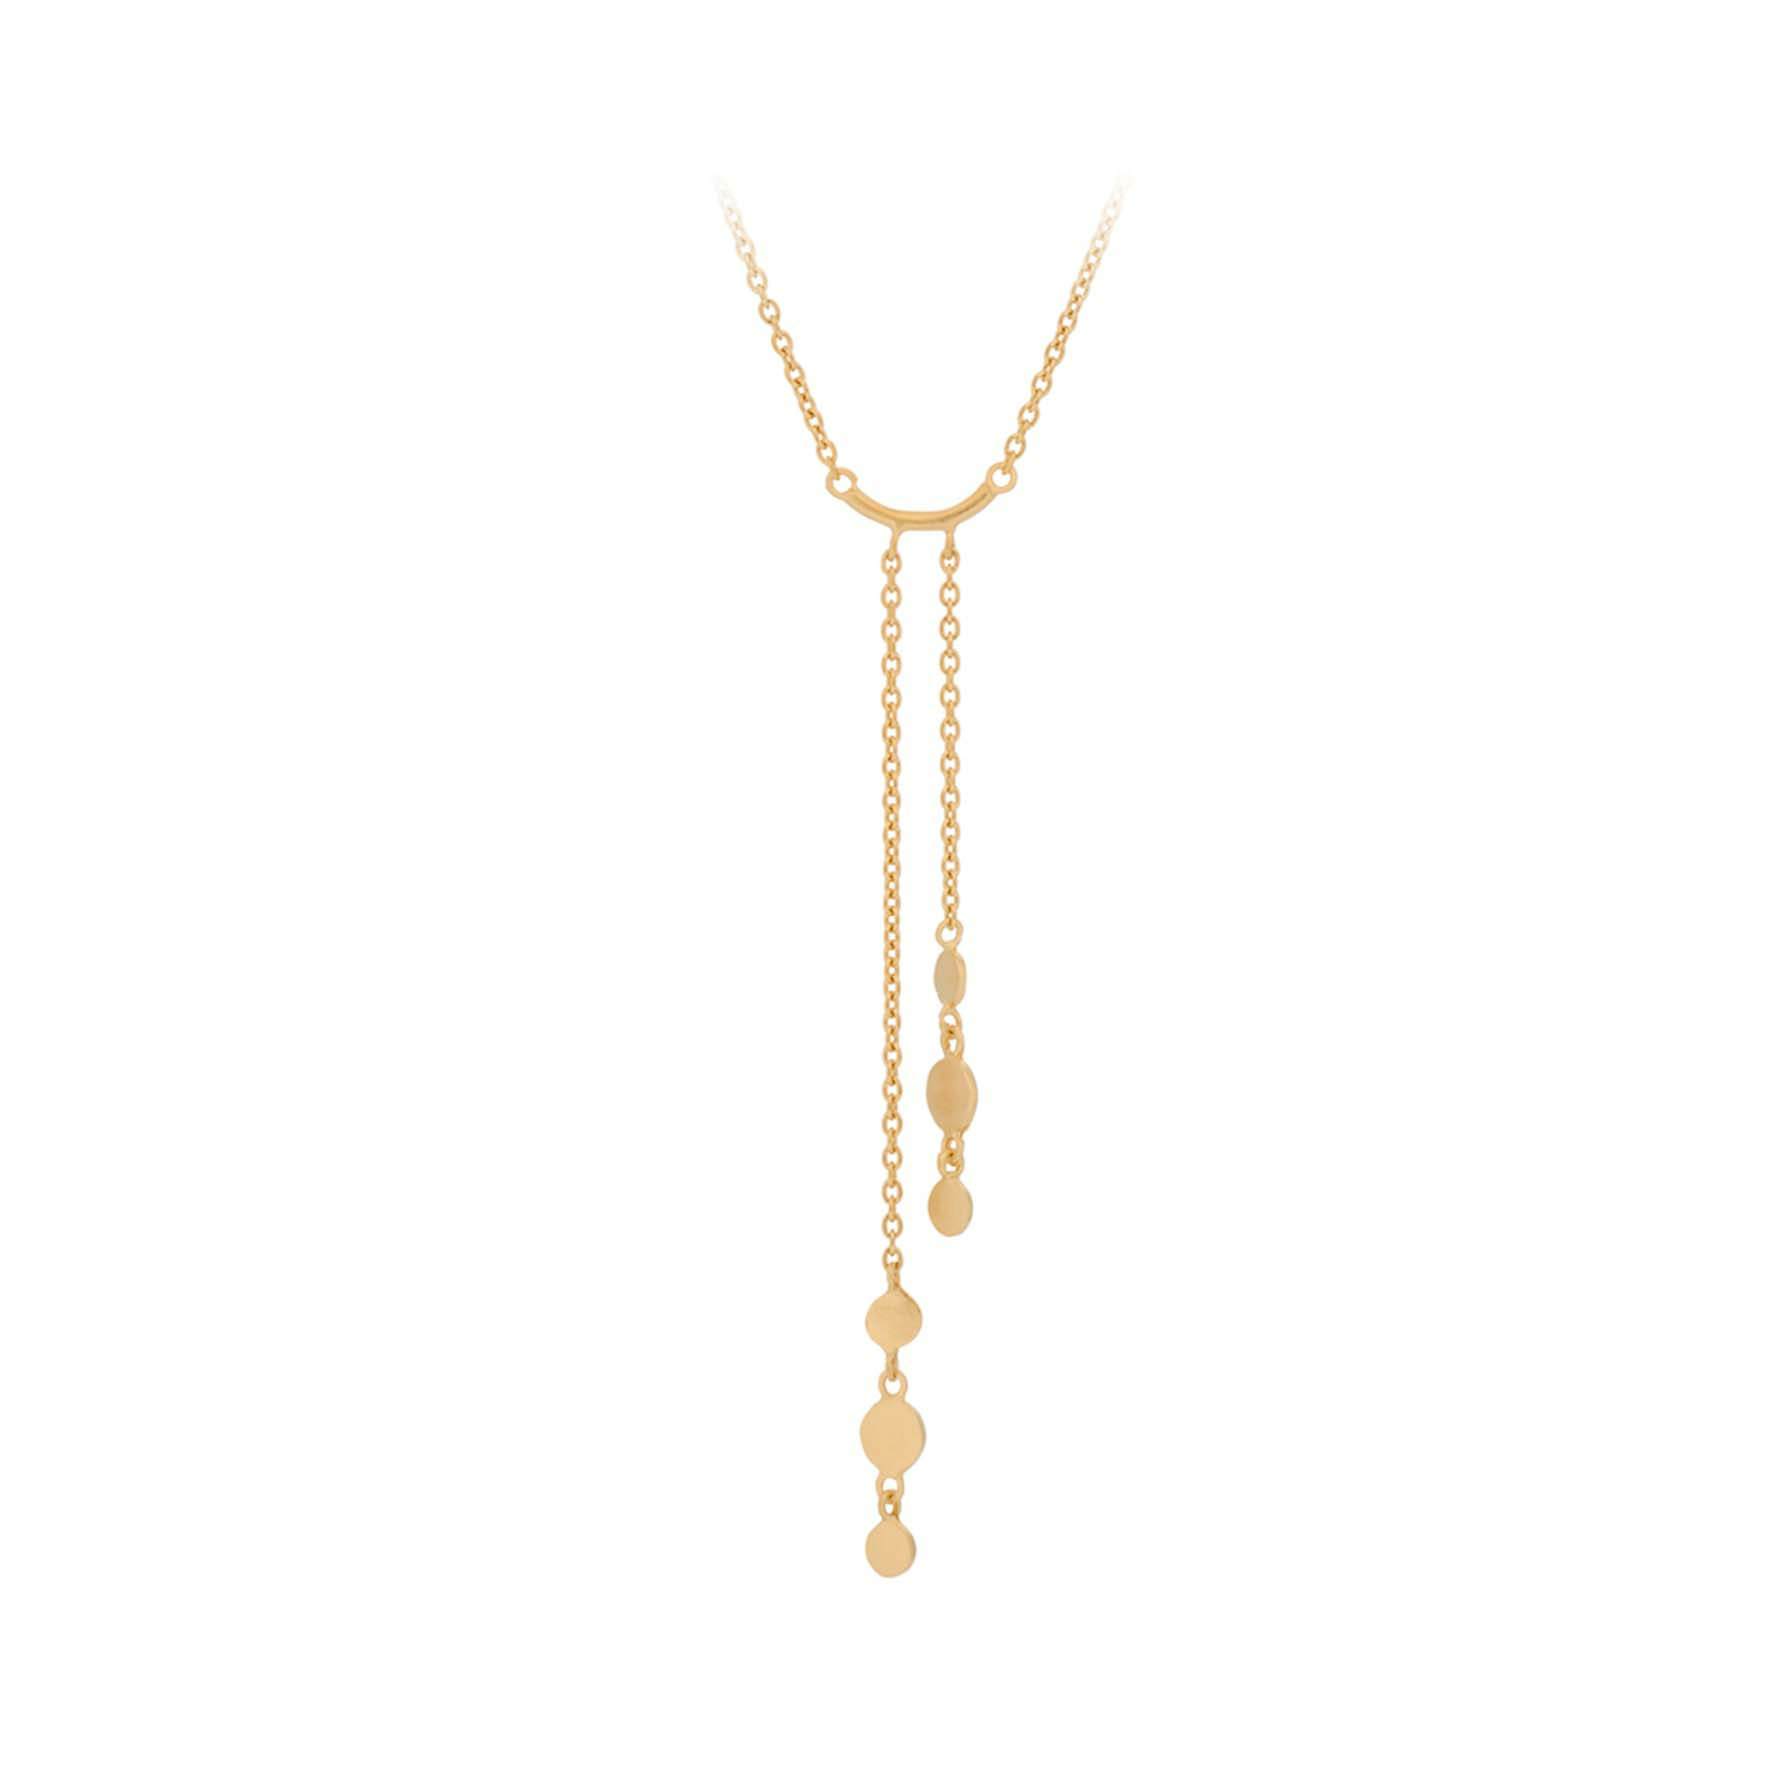 Flow Necklace from Pernille Corydon in Goldplated-Silver Sterling 925